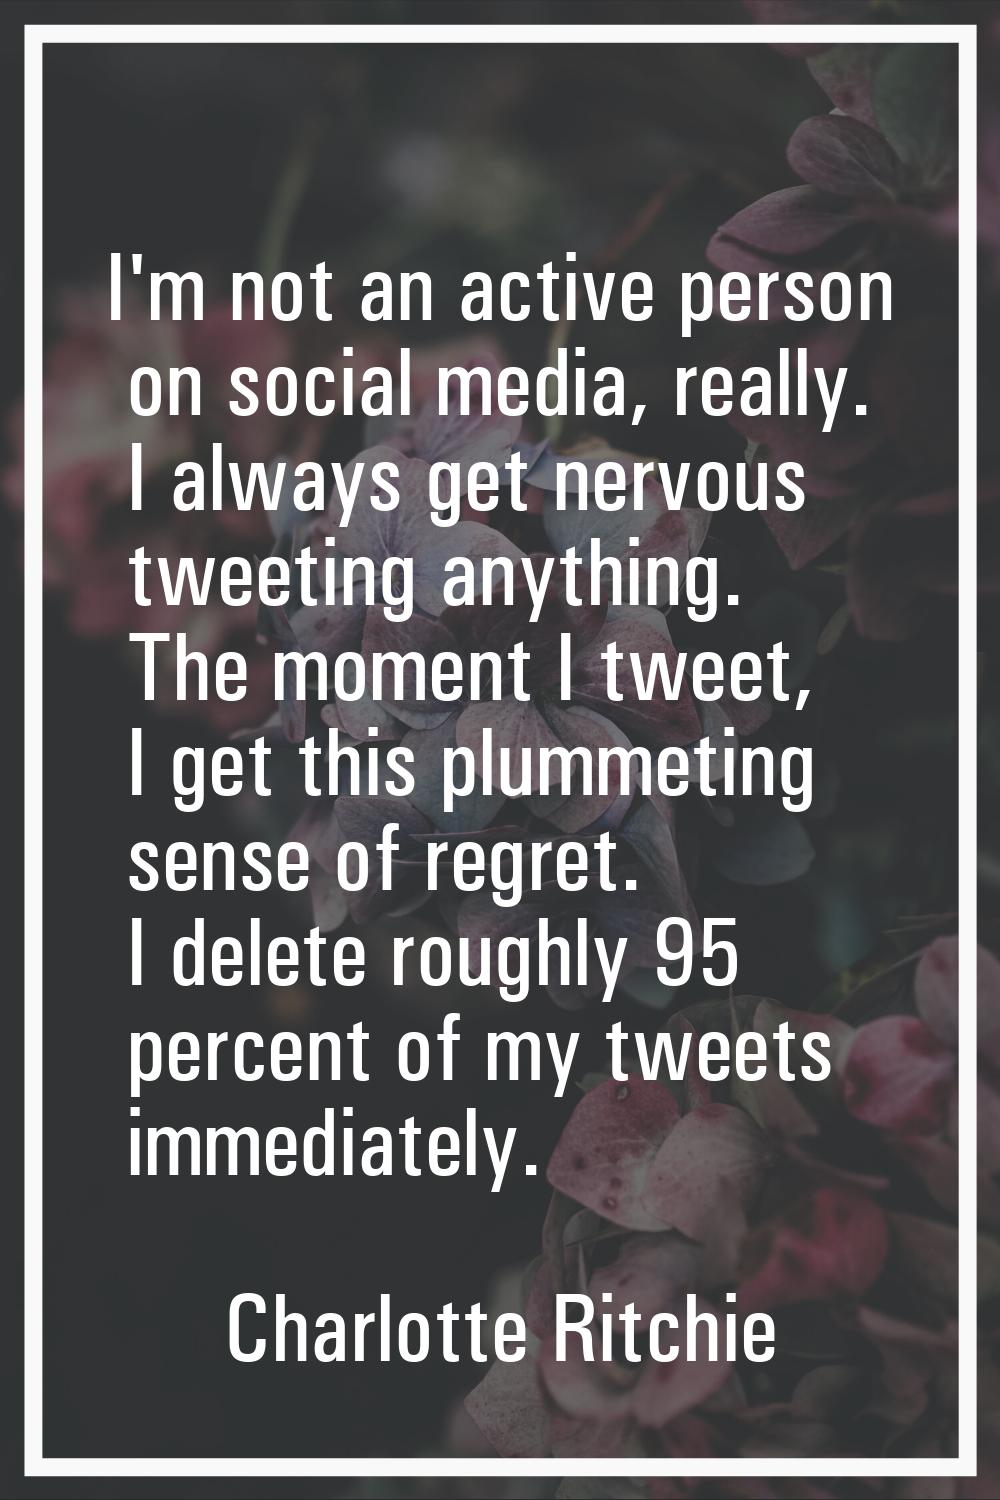 I'm not an active person on social media, really. I always get nervous tweeting anything. The momen